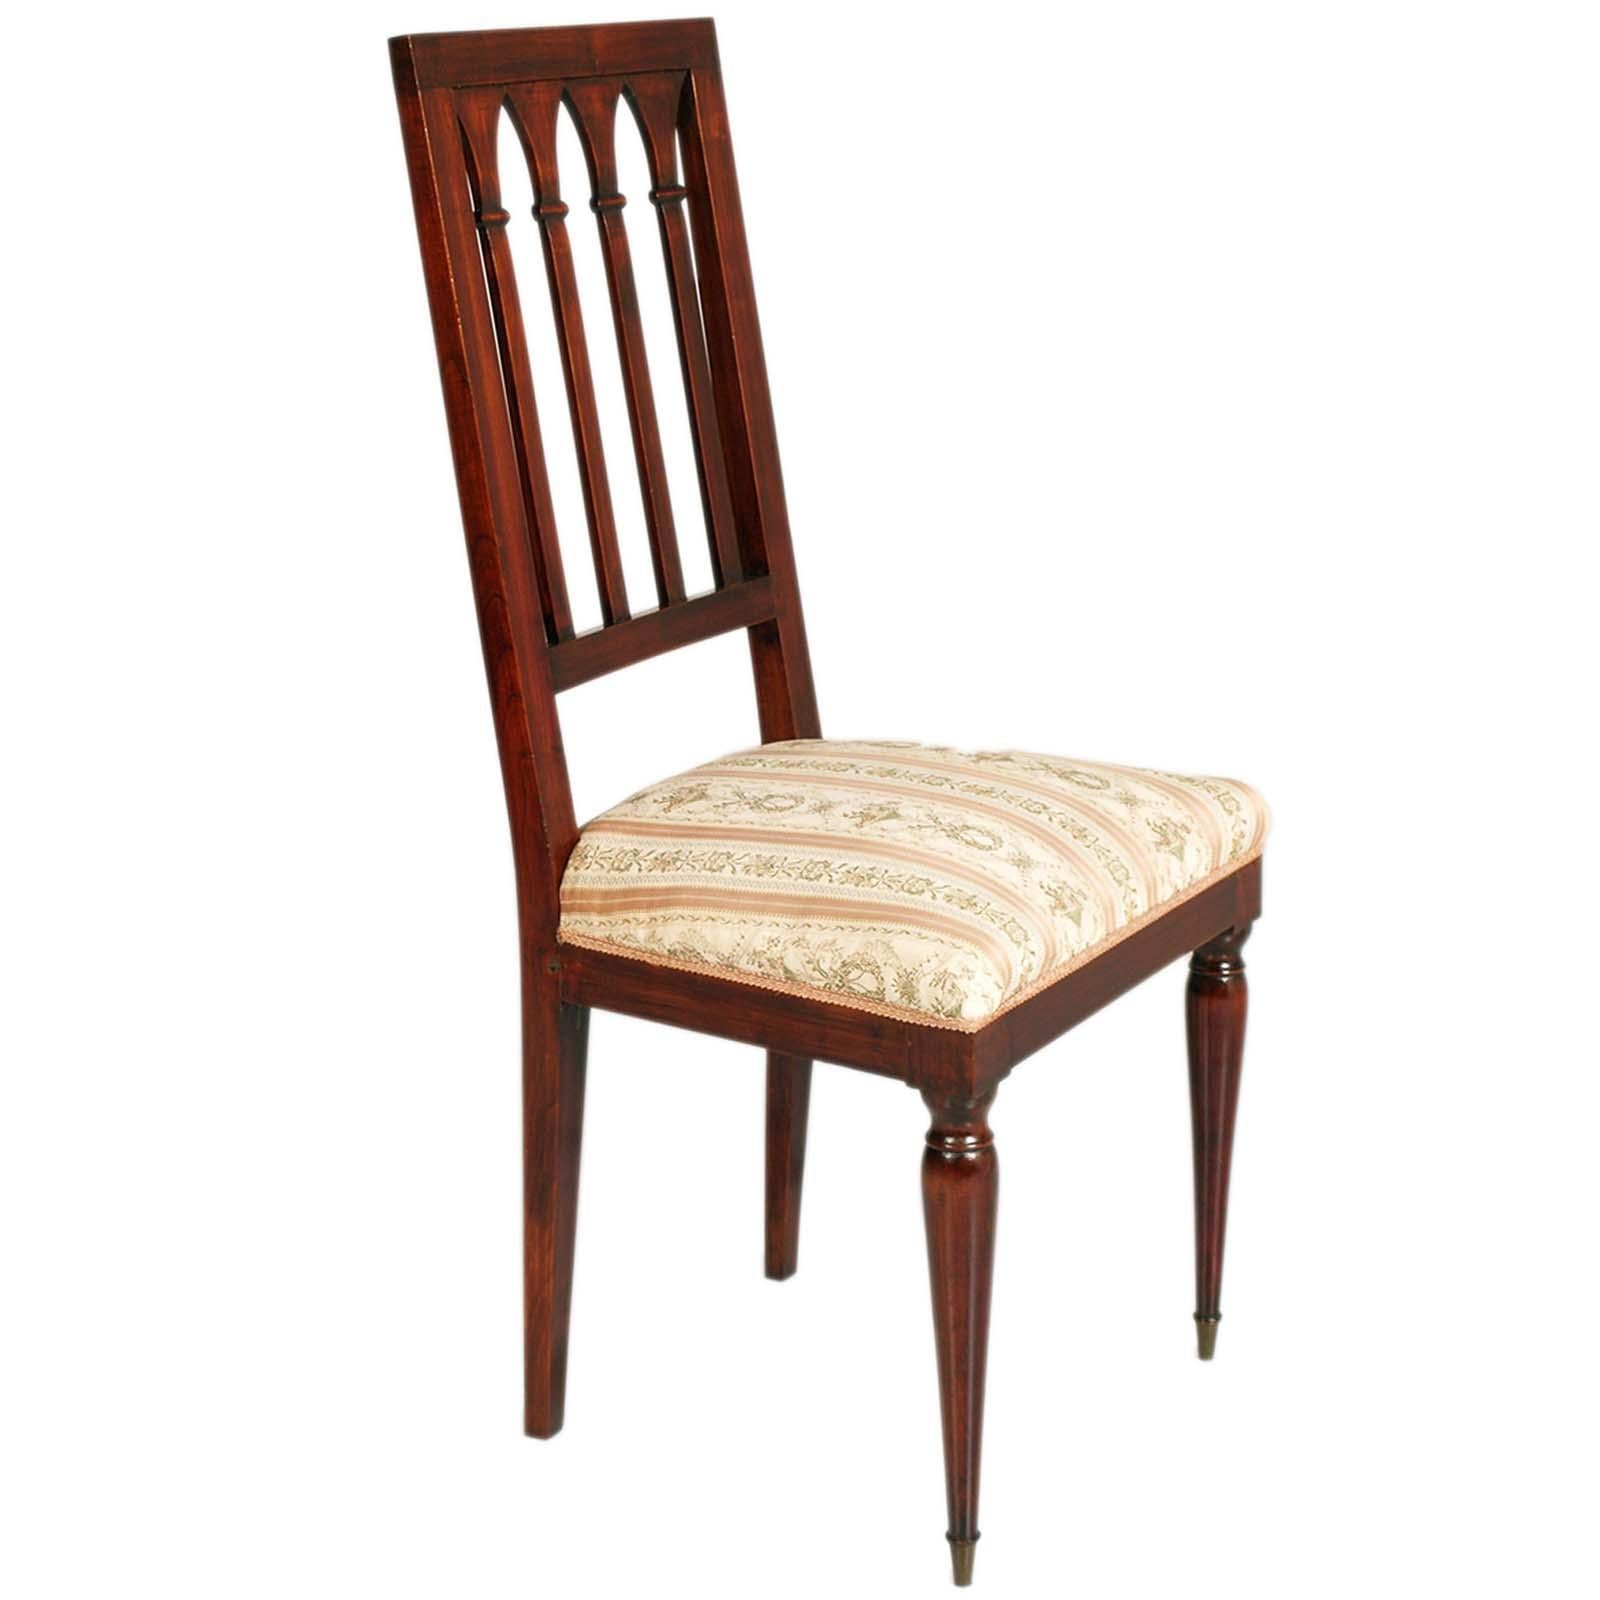 French mid-century Gothic style chairs in mahogany, sturdy and in good condition, sprung seat with upholstery still usable. Upon request we can customize the upholstery.
Very elegant with a very particular design

About Charles Dudouyt
French,